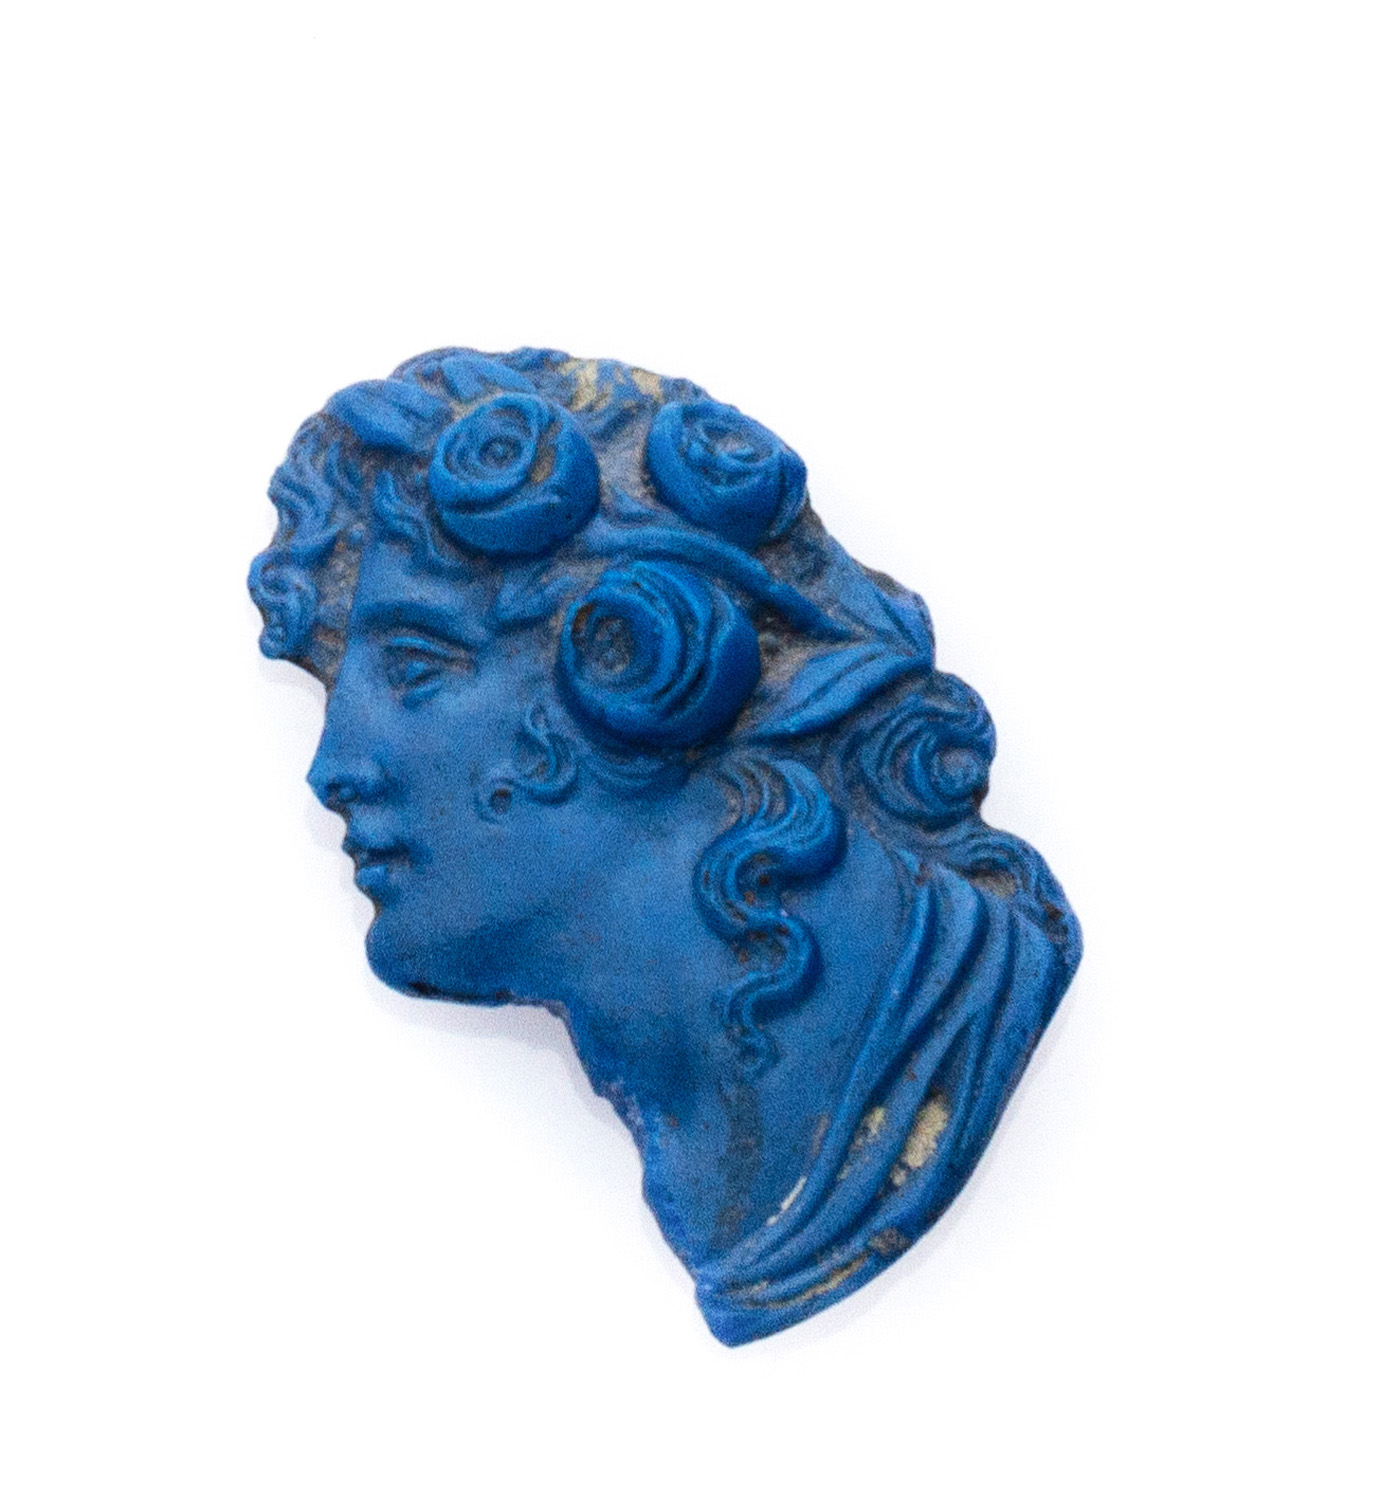 RARE BAS-RELIEF in antique azzurrite of woman's profile with roses in the hair. Measures cm. 3 x 18.